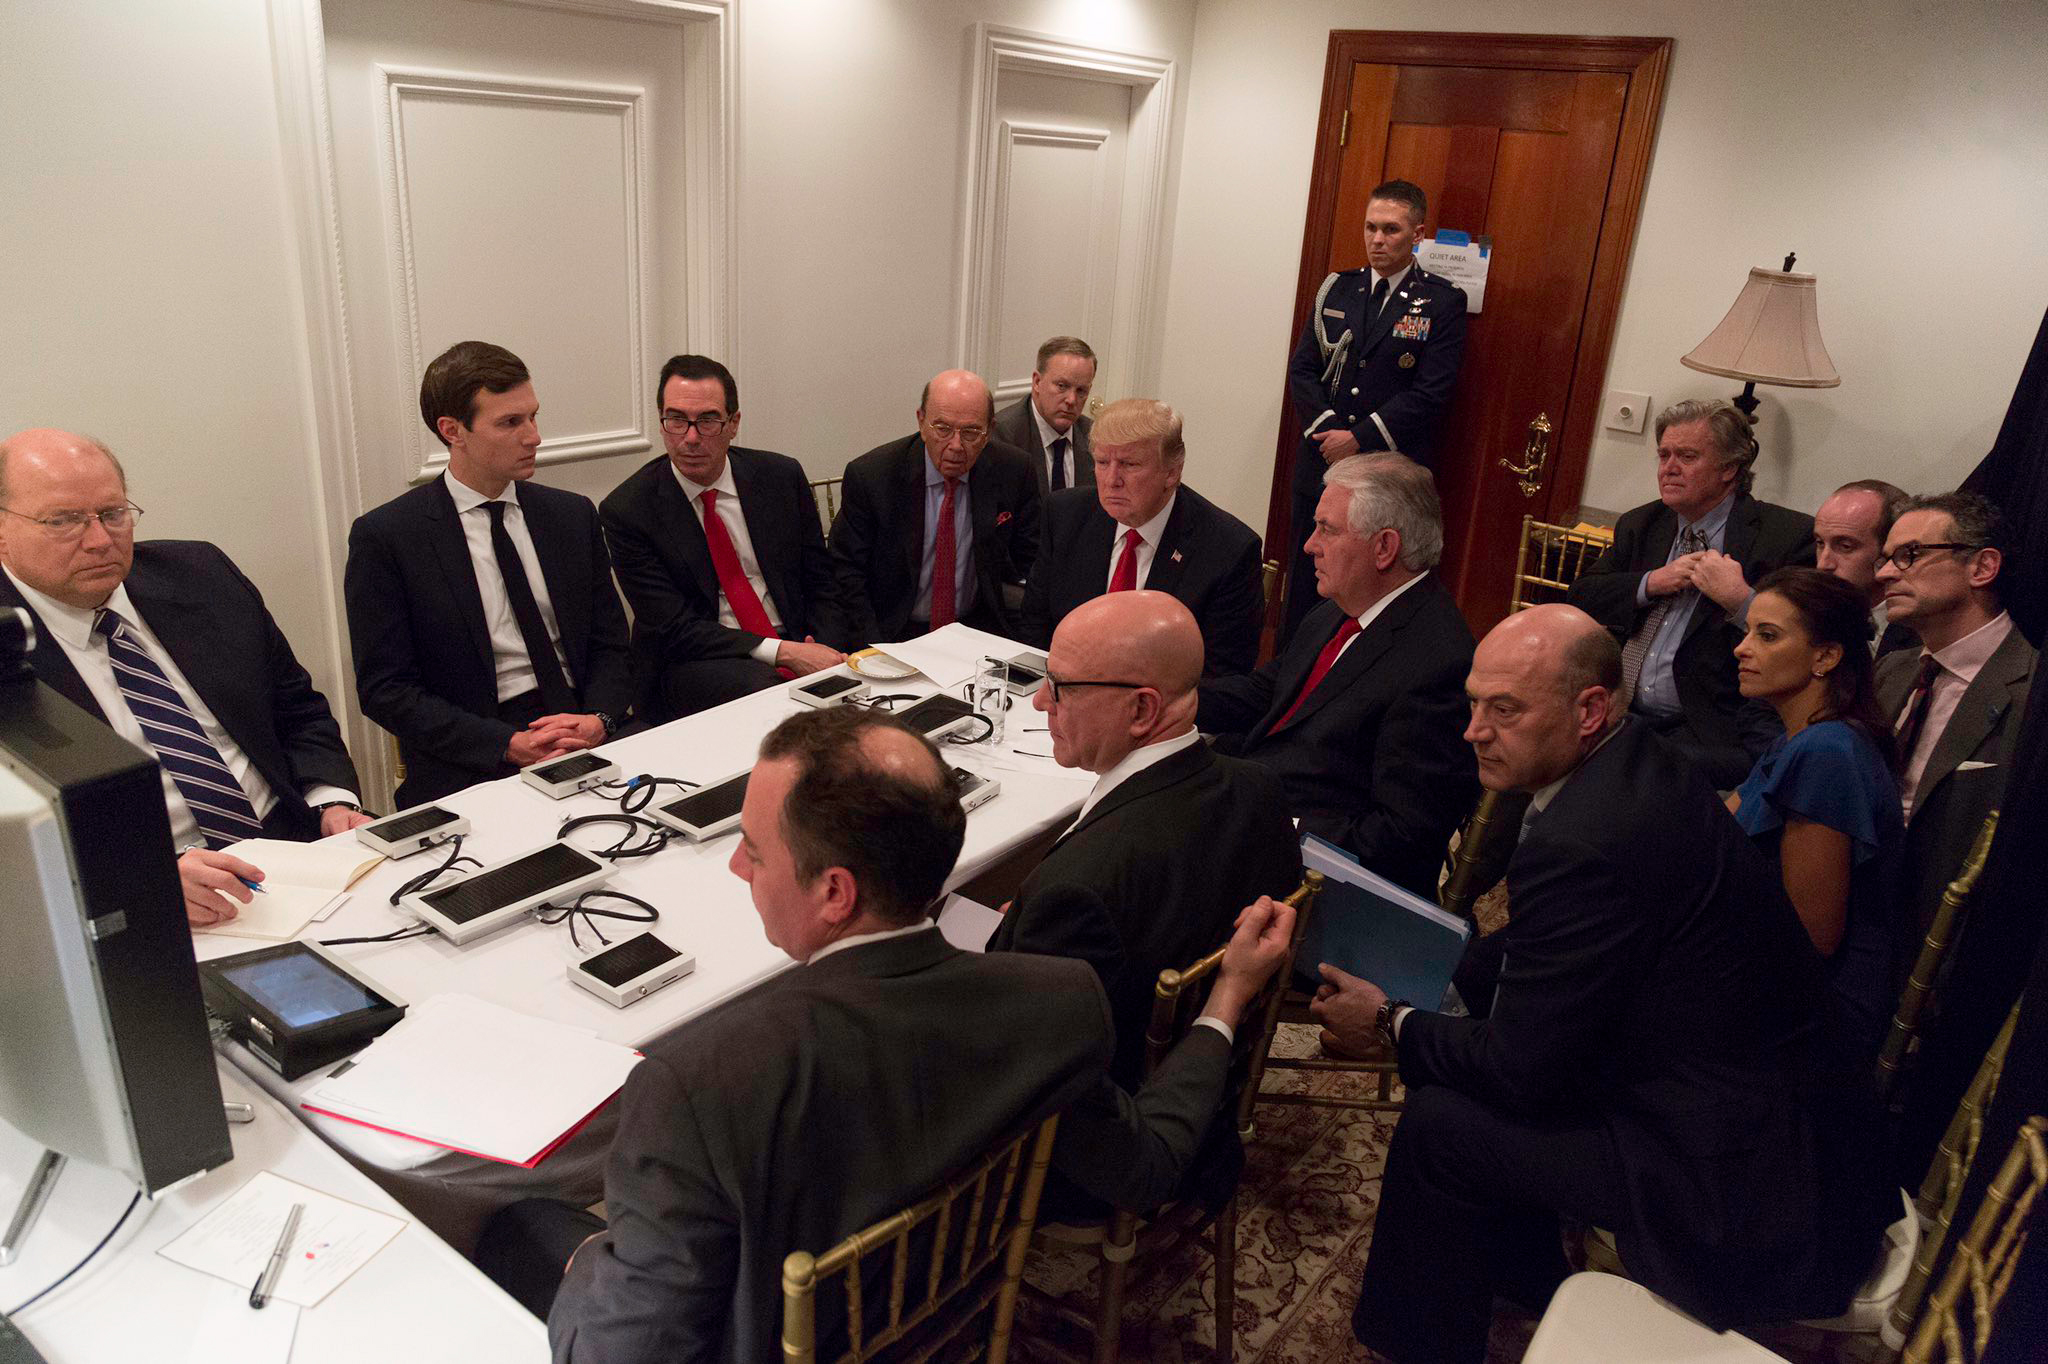 An image released April 7, 2017, by White House Press Secretary Sean Spicer that is said to show a national security briefing at President Trump at Mar-a-Lago after the U.S. launched missiles into Syria on April 6, 2017. Spicer said on Twitter the photo was edited for security. (The White House)